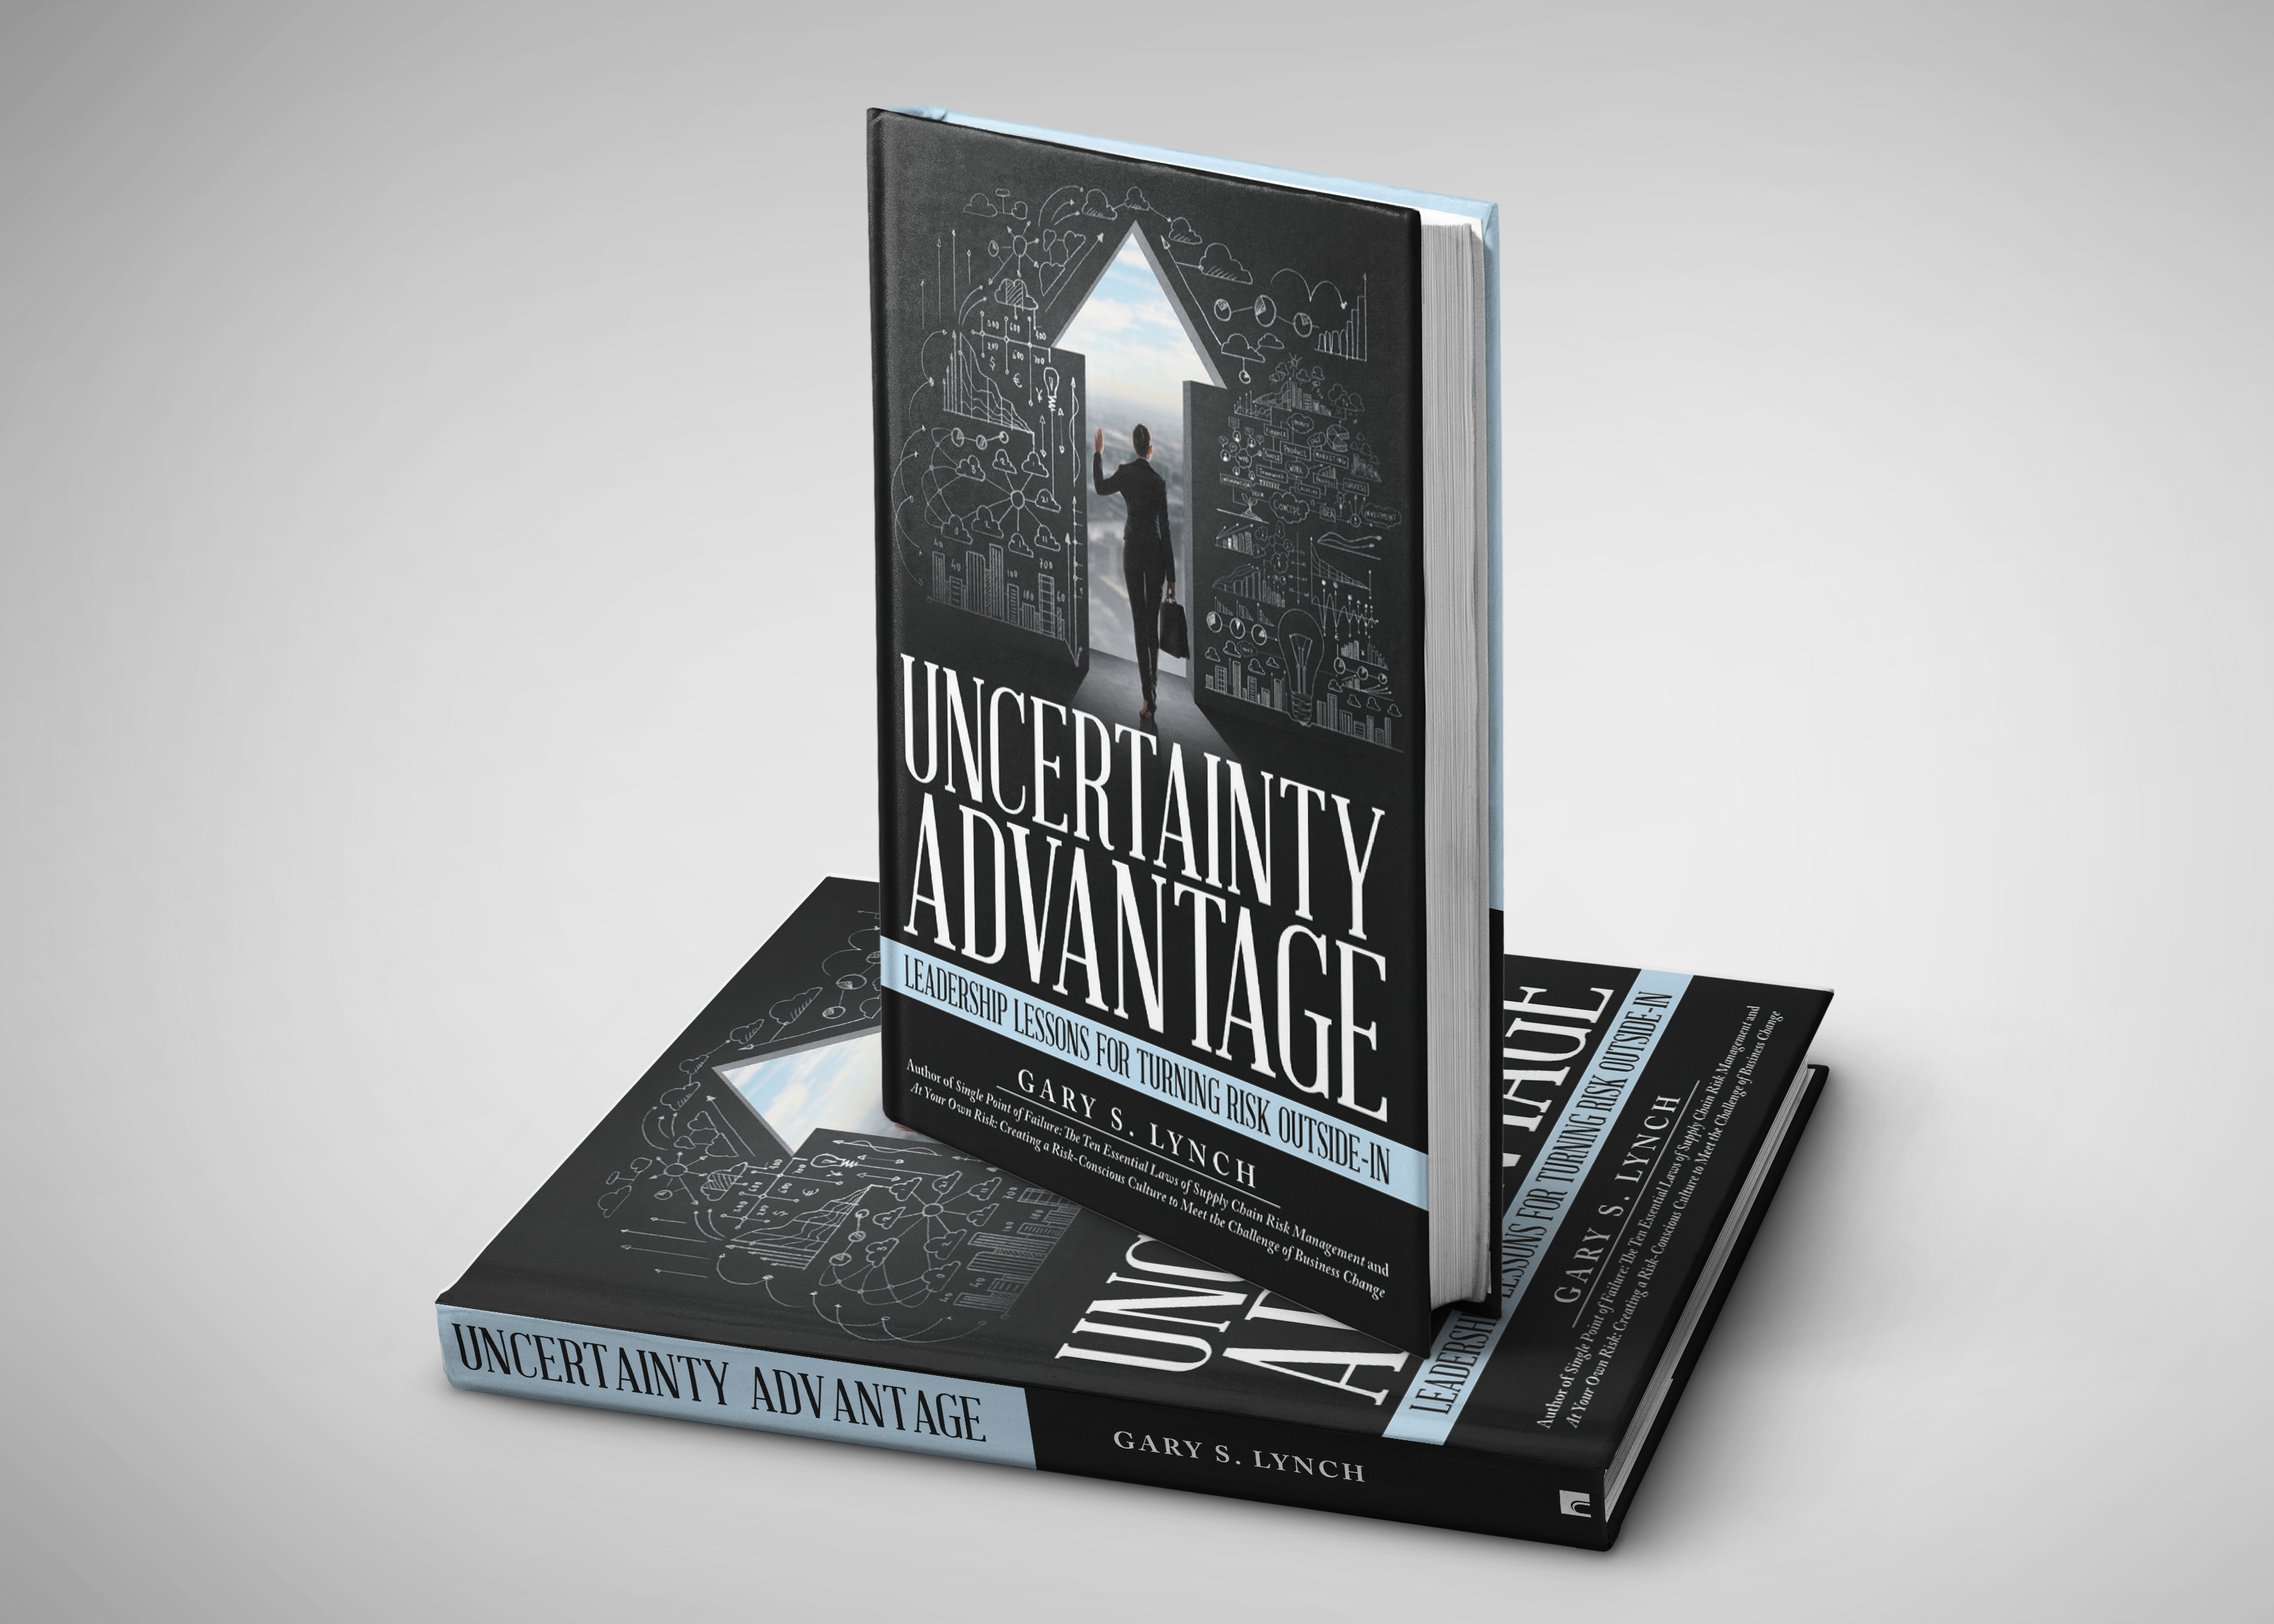 Uncertainty Advantage: Leadership Lessons for Turning Risk Outside-In